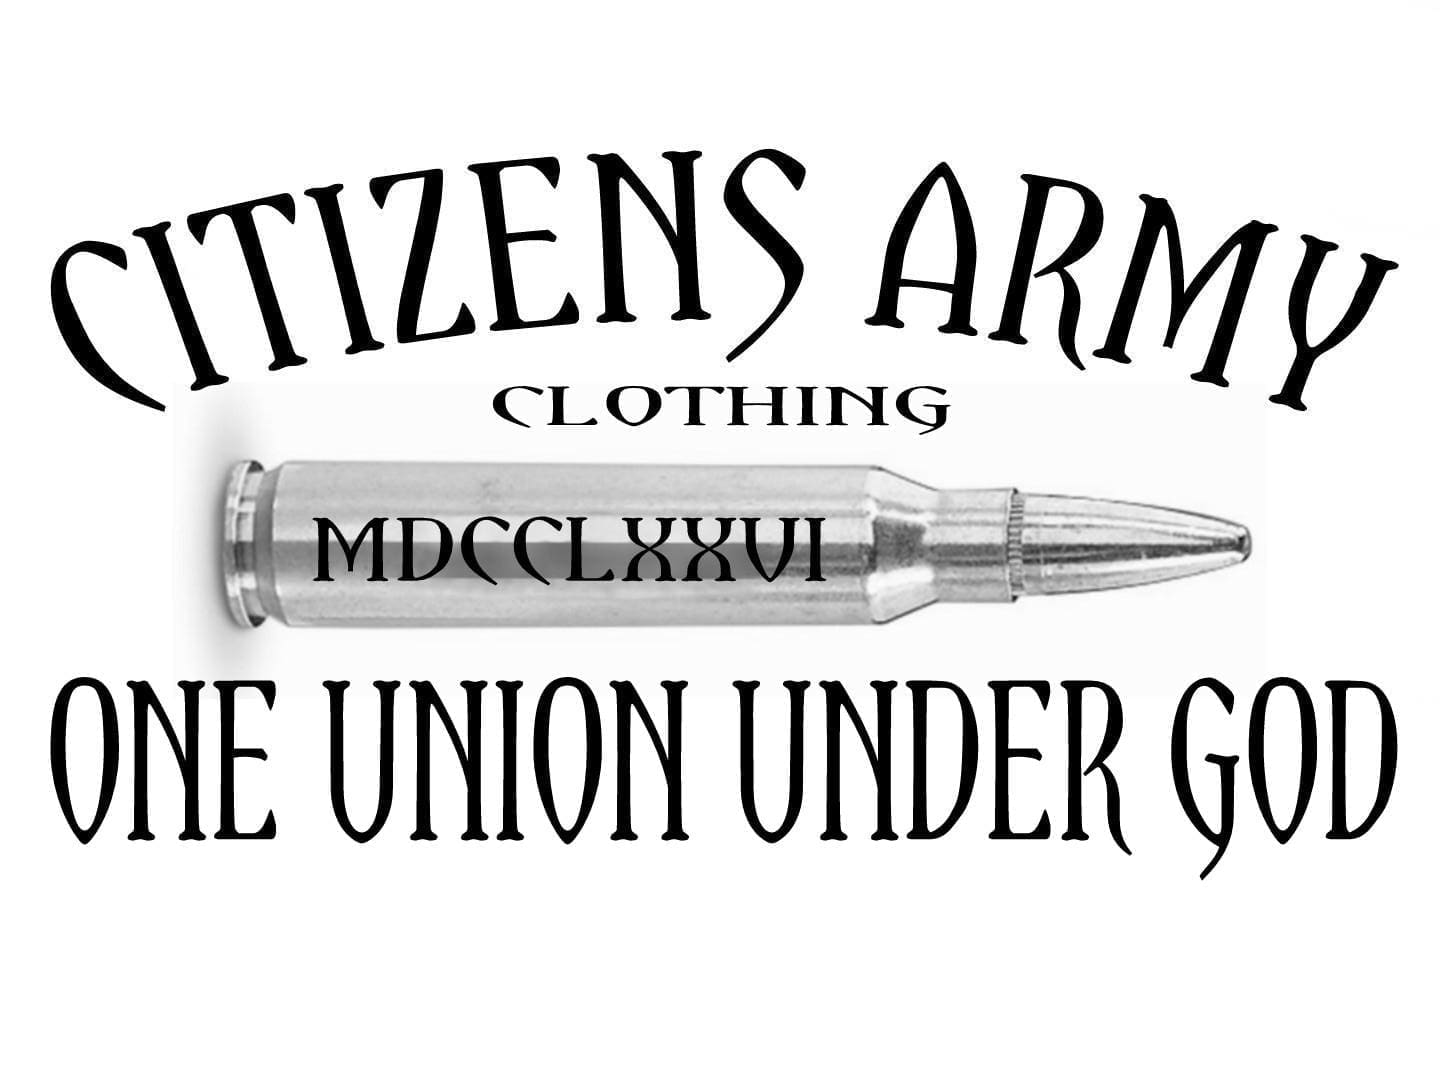 Citizens Army Logo without Trademark